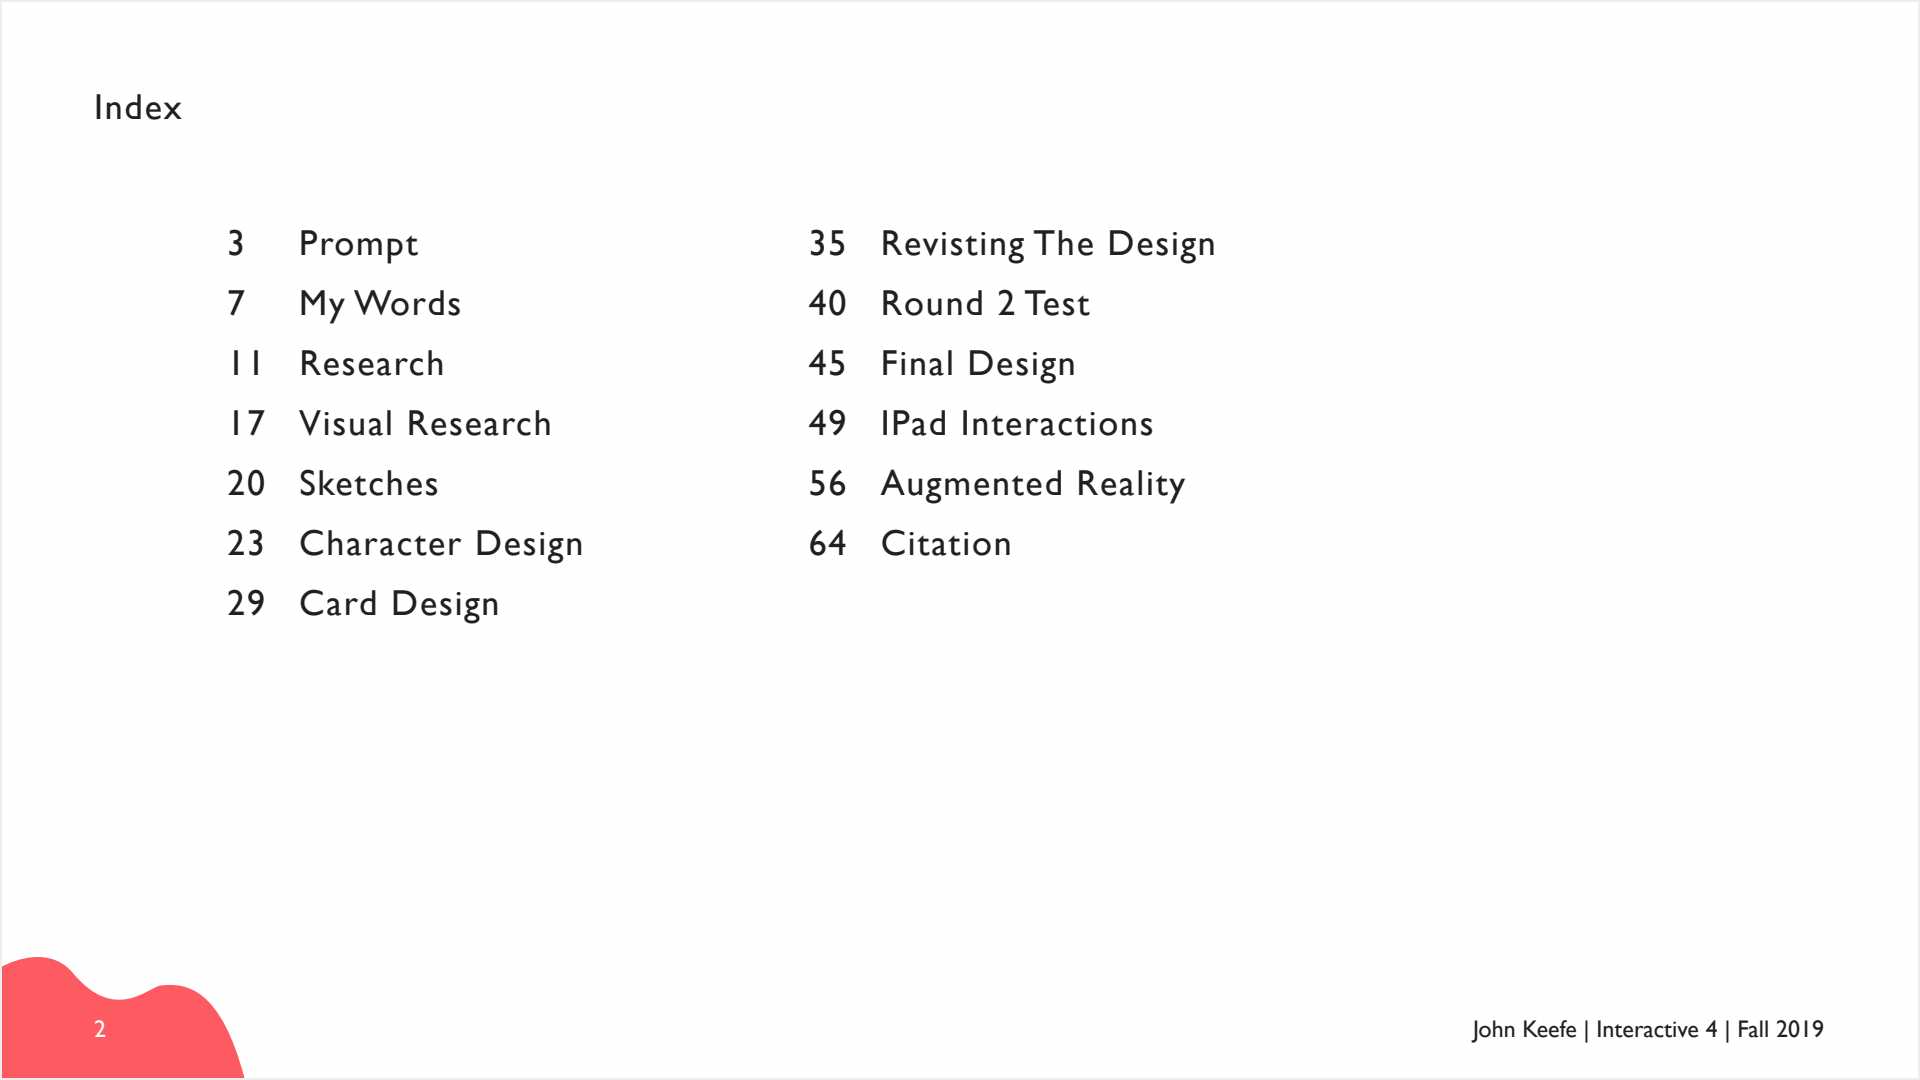 John Keefe’s Process Deck Page Number 2